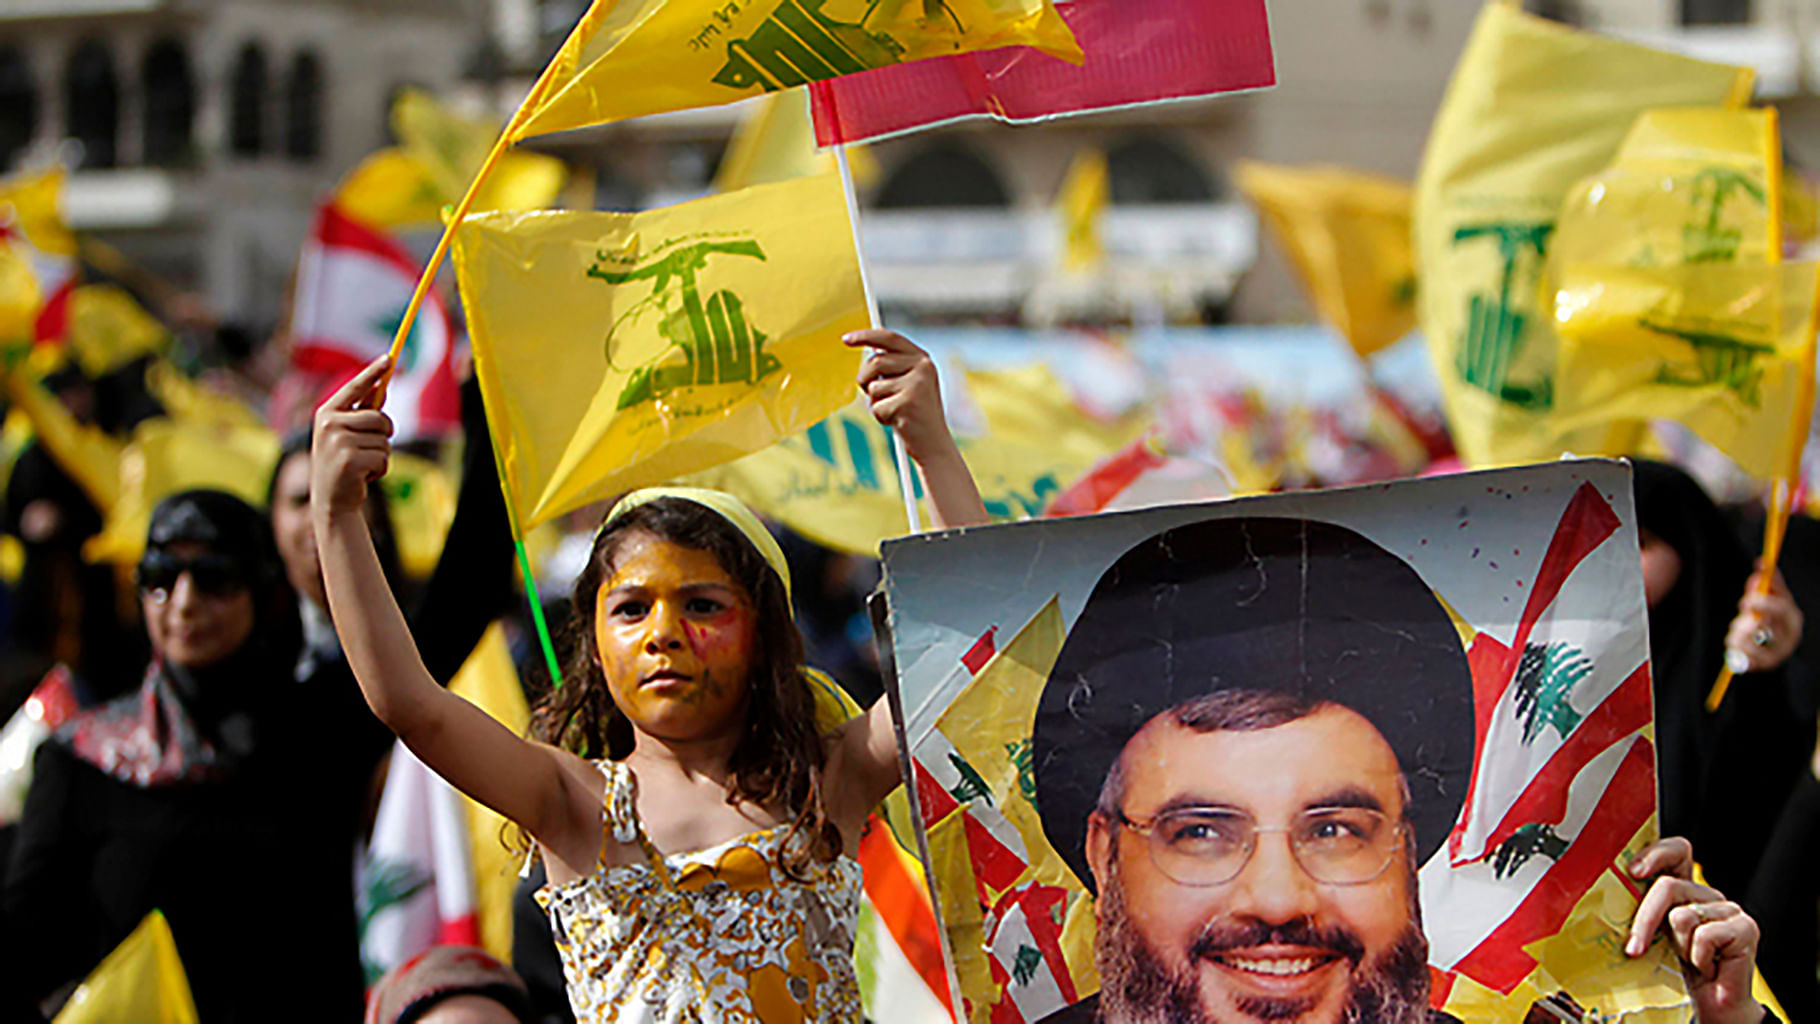 Hezbollah supporters in Lebanon. (Photo: Reuters)